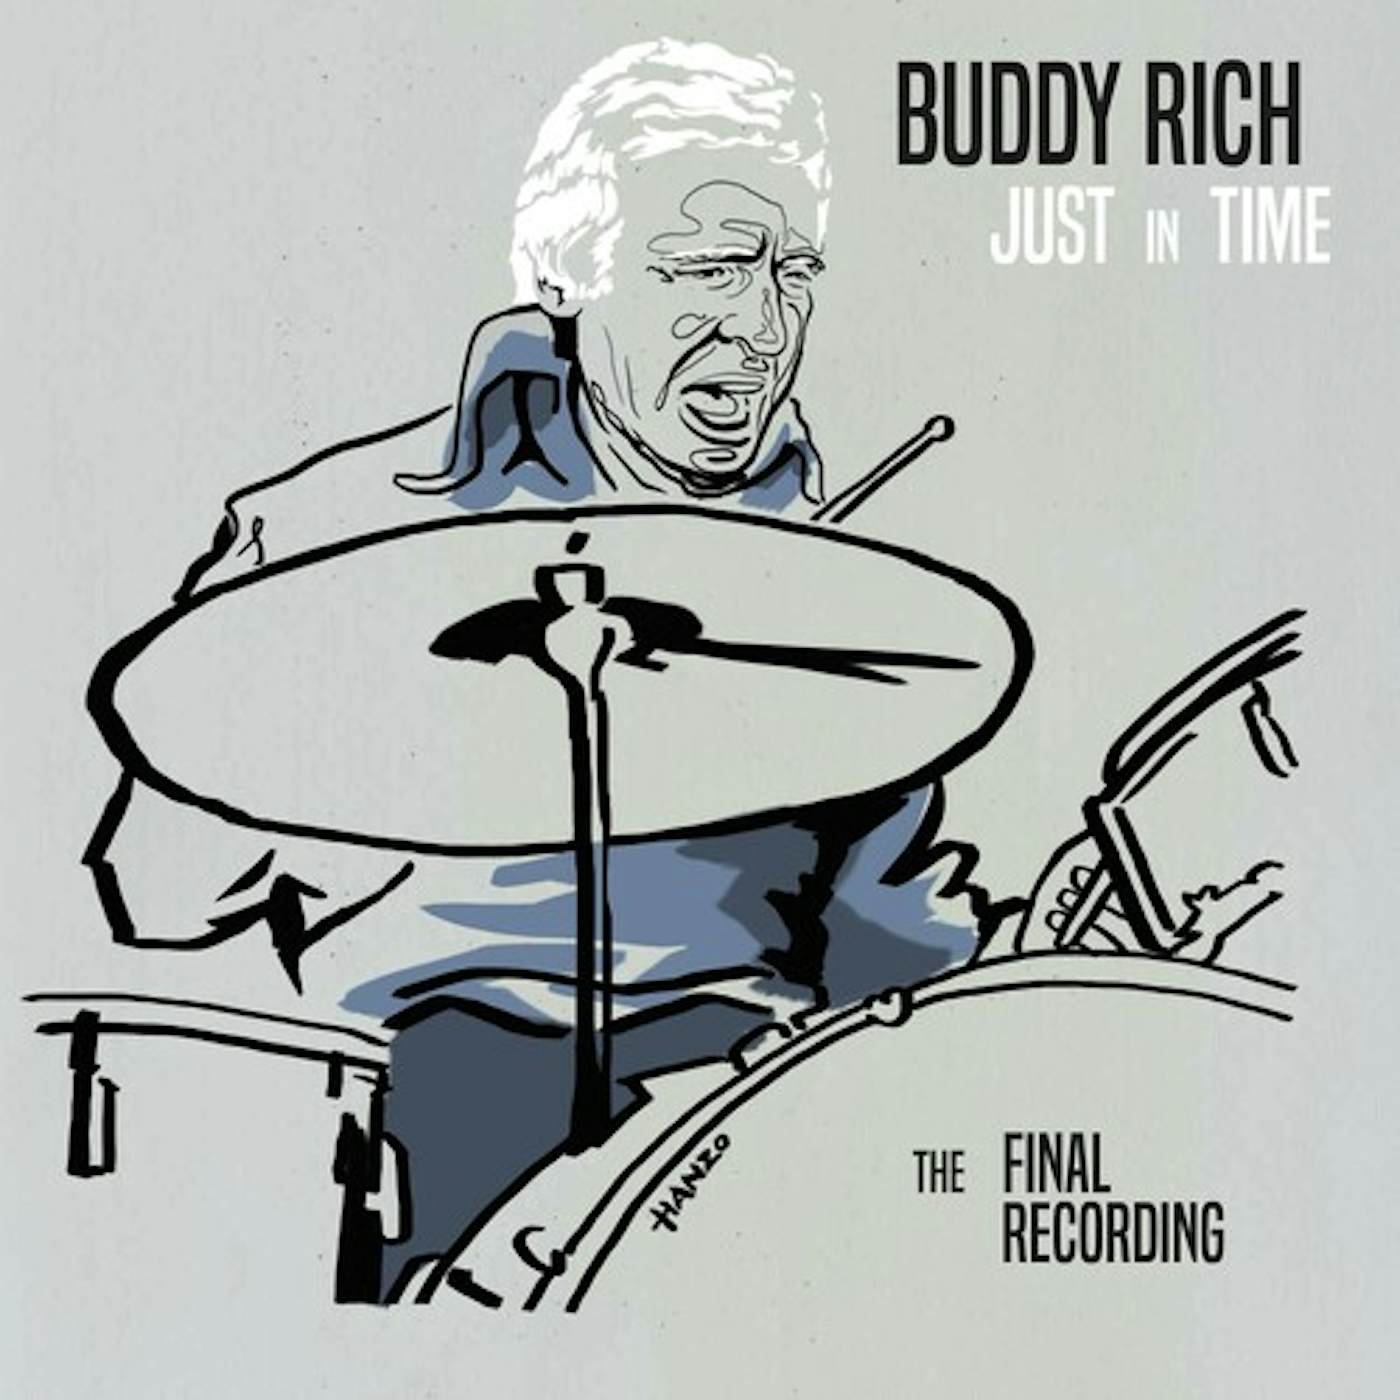 Buddy Rich Just in Time - The Final Recording Vinyl Record